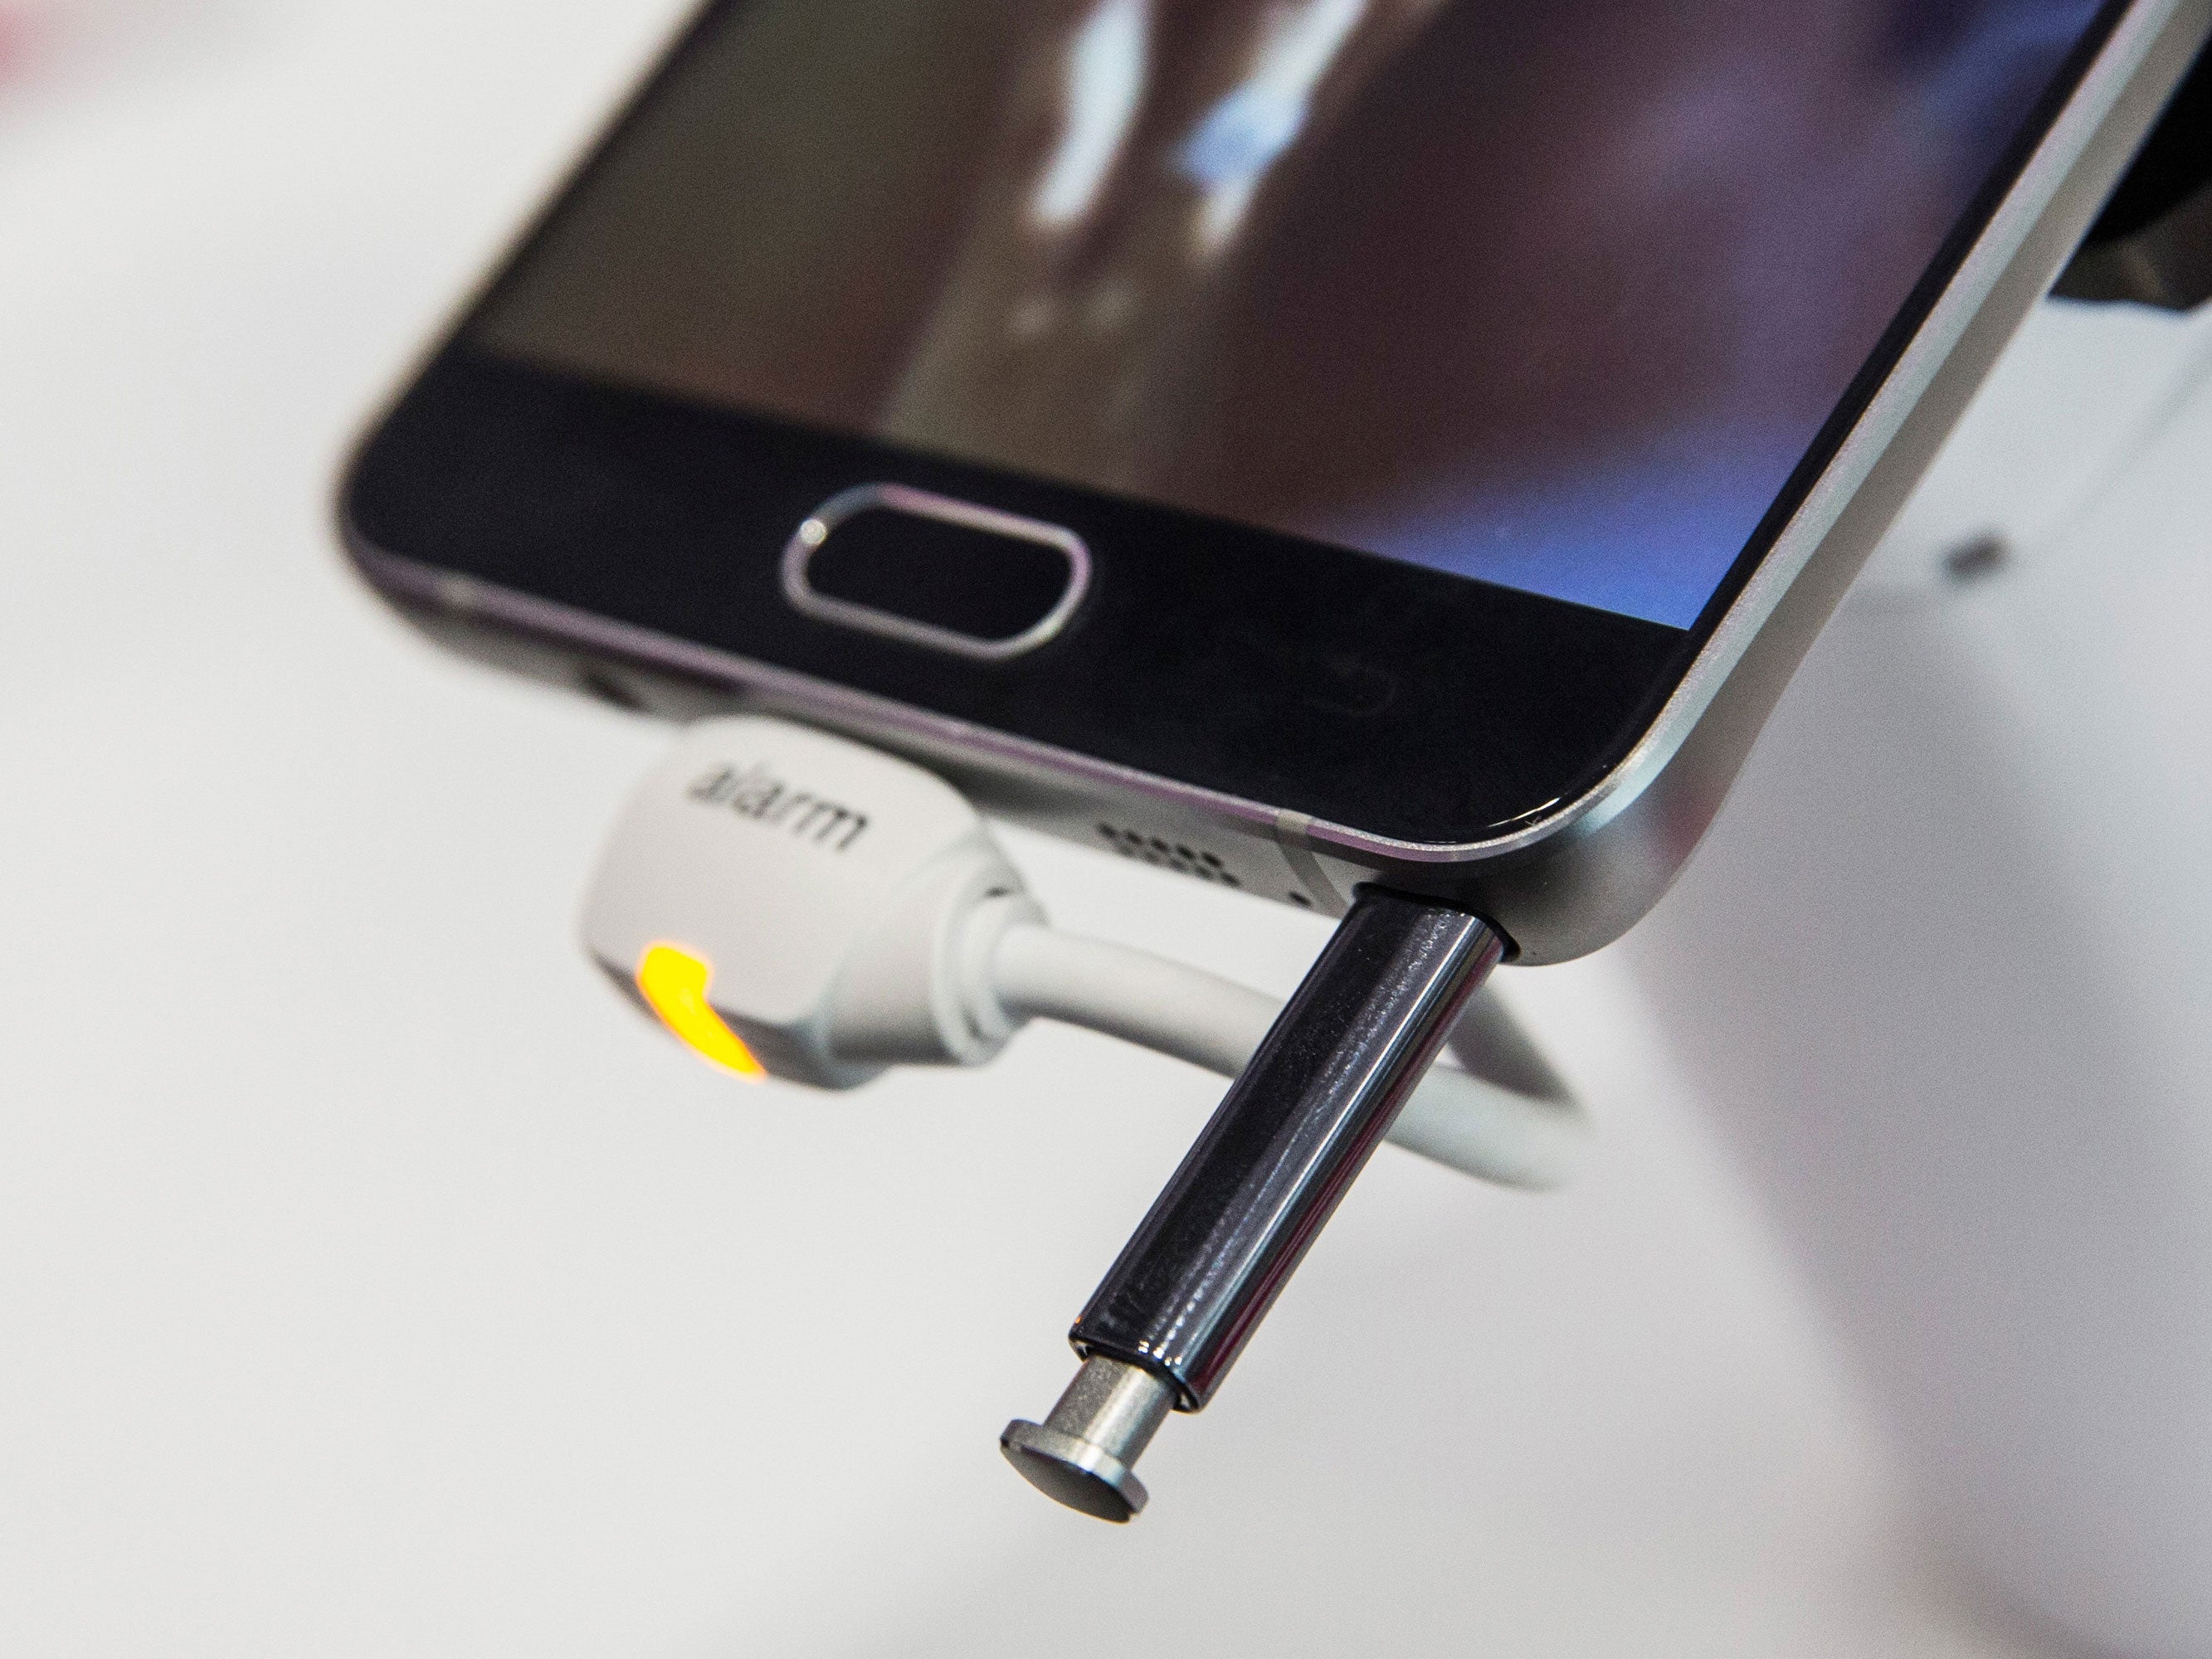 The new Samsung Galaxy Note 5 sits on display in a store on August 21, 2015 in New York, United States